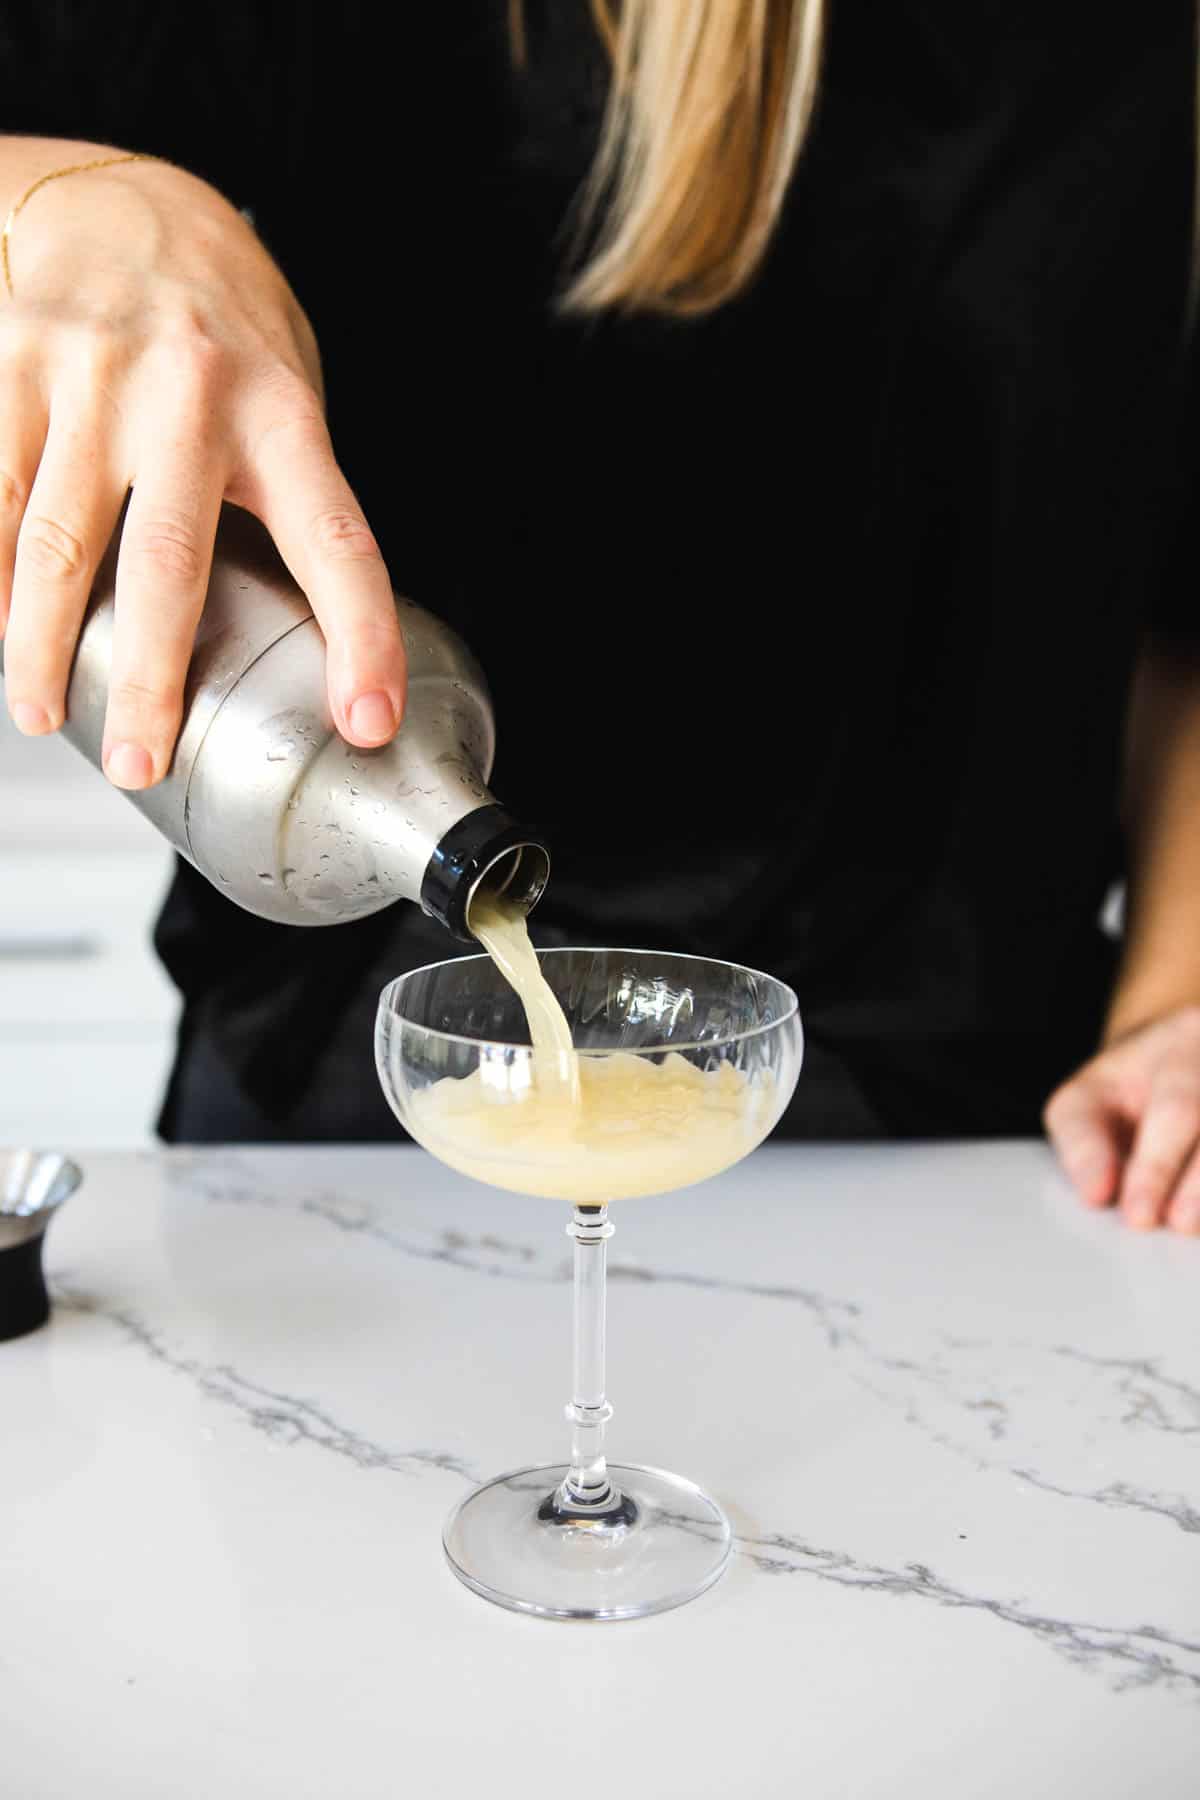 Woman pouring a drink into a cocktail glass.